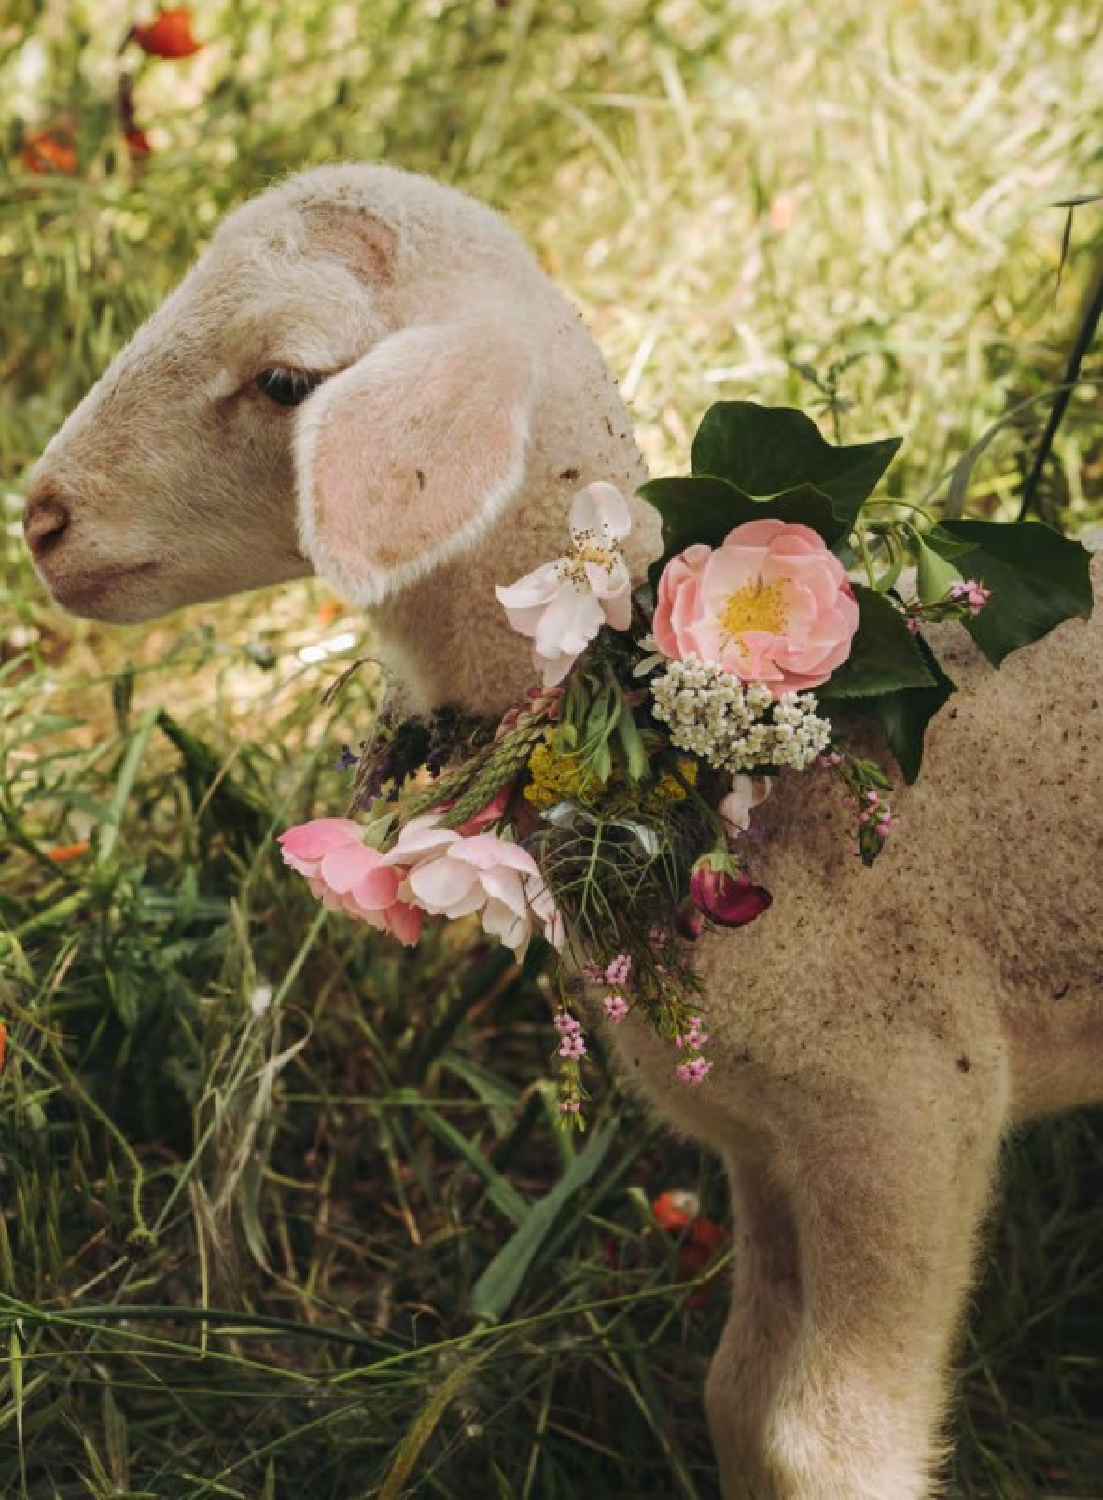 A charming lamb with a wreath of flowers from Provence in THE FLOWERS OF PROVENCE by Jamie Beck. #provencestyle #flowersofprovence #jamiebeck